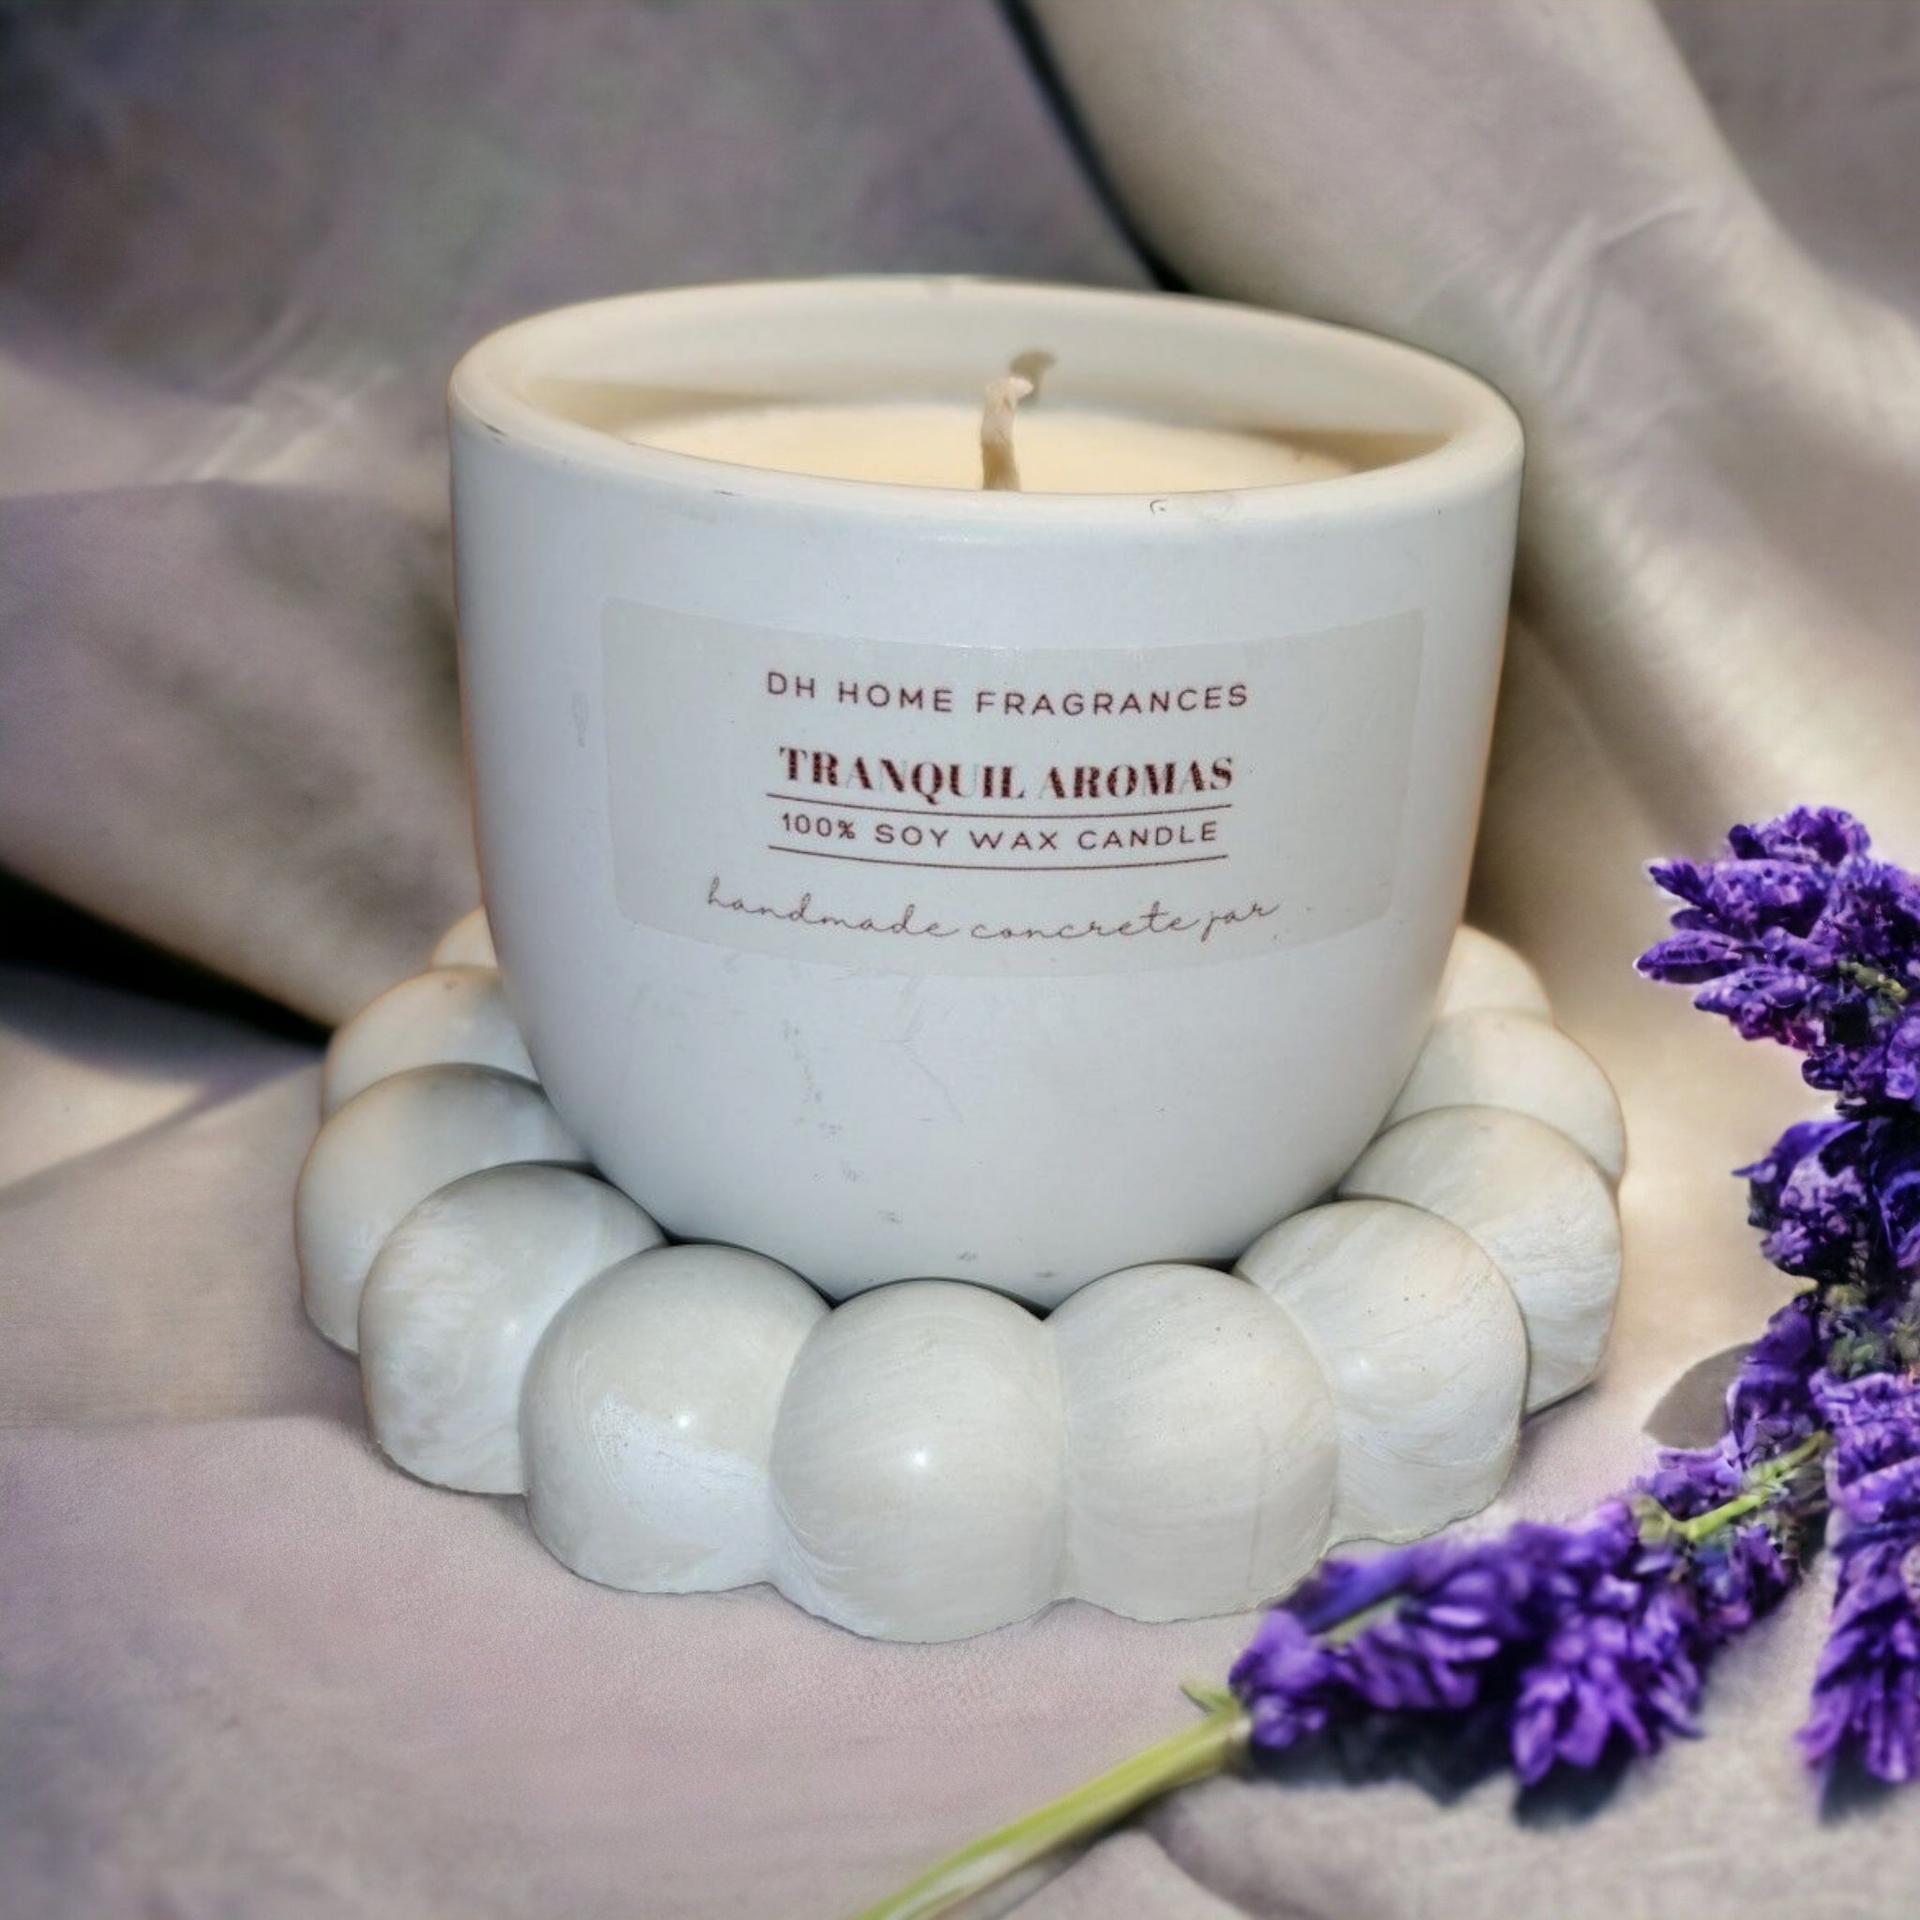 Friend - 8 oz - 100% Soy Wax Candle Scent: Tranquility